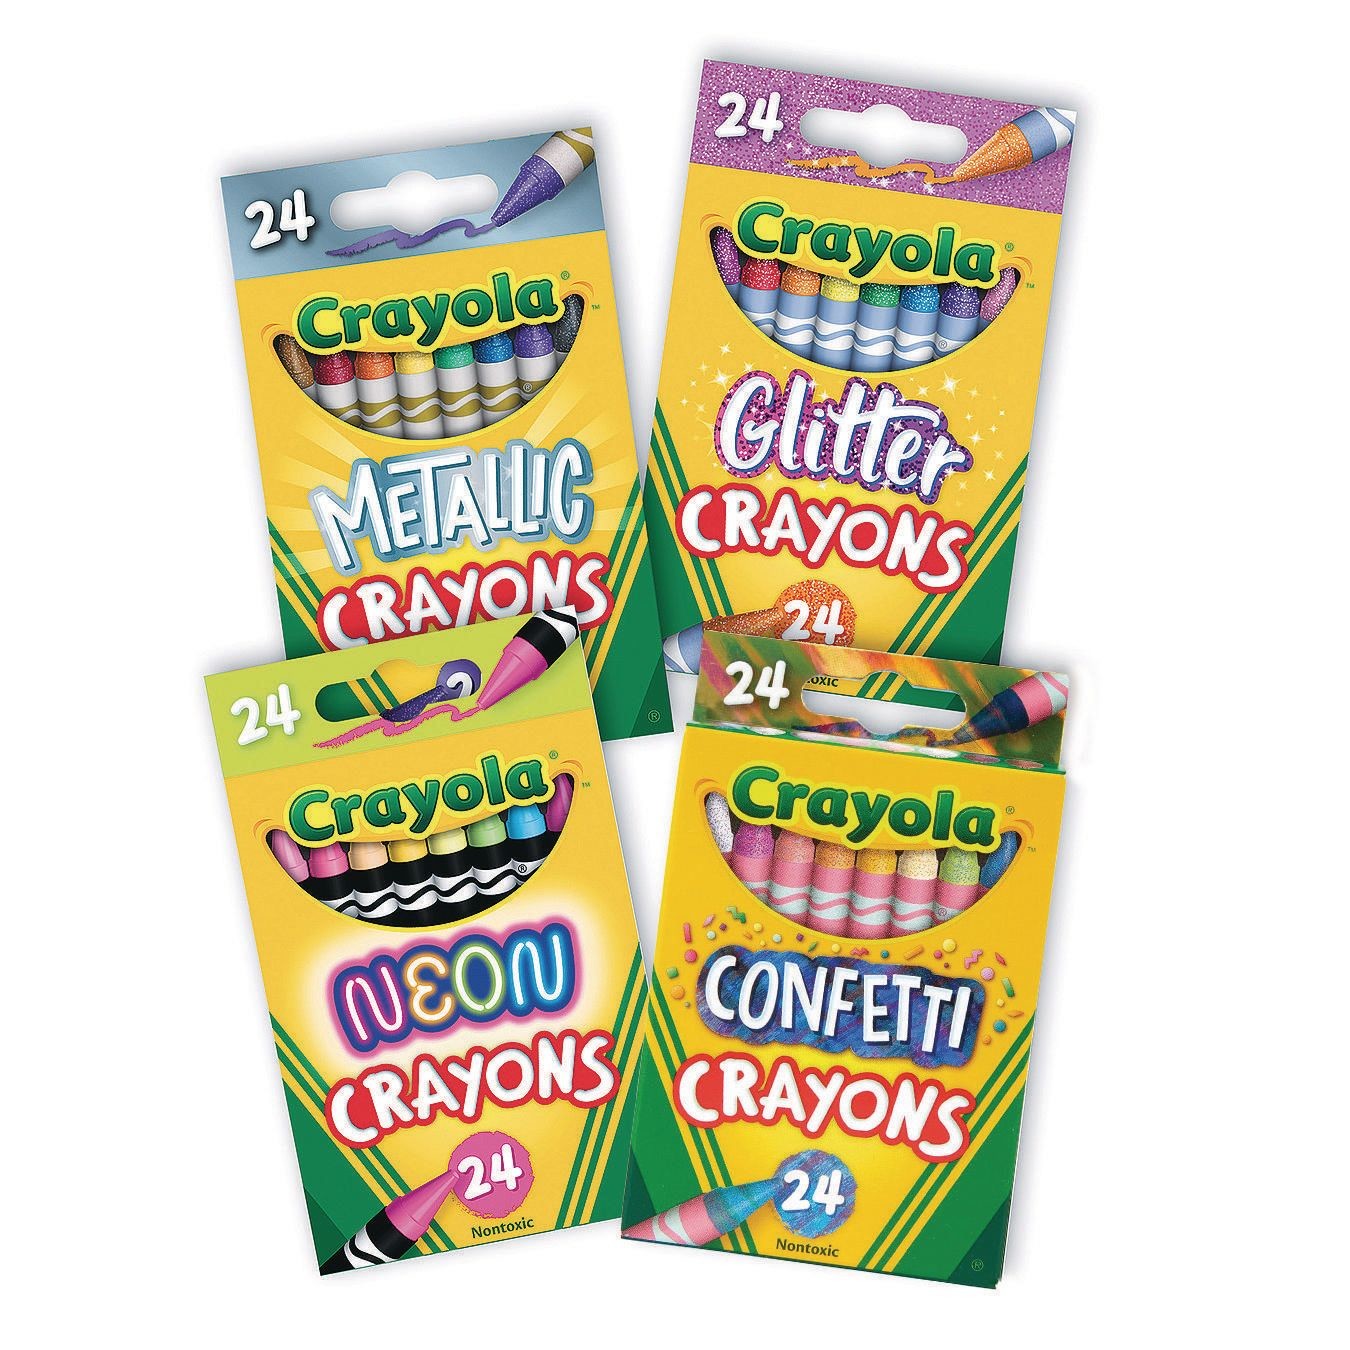 Buy Crayola® Palm-Grip Crayons at S&S Worldwide